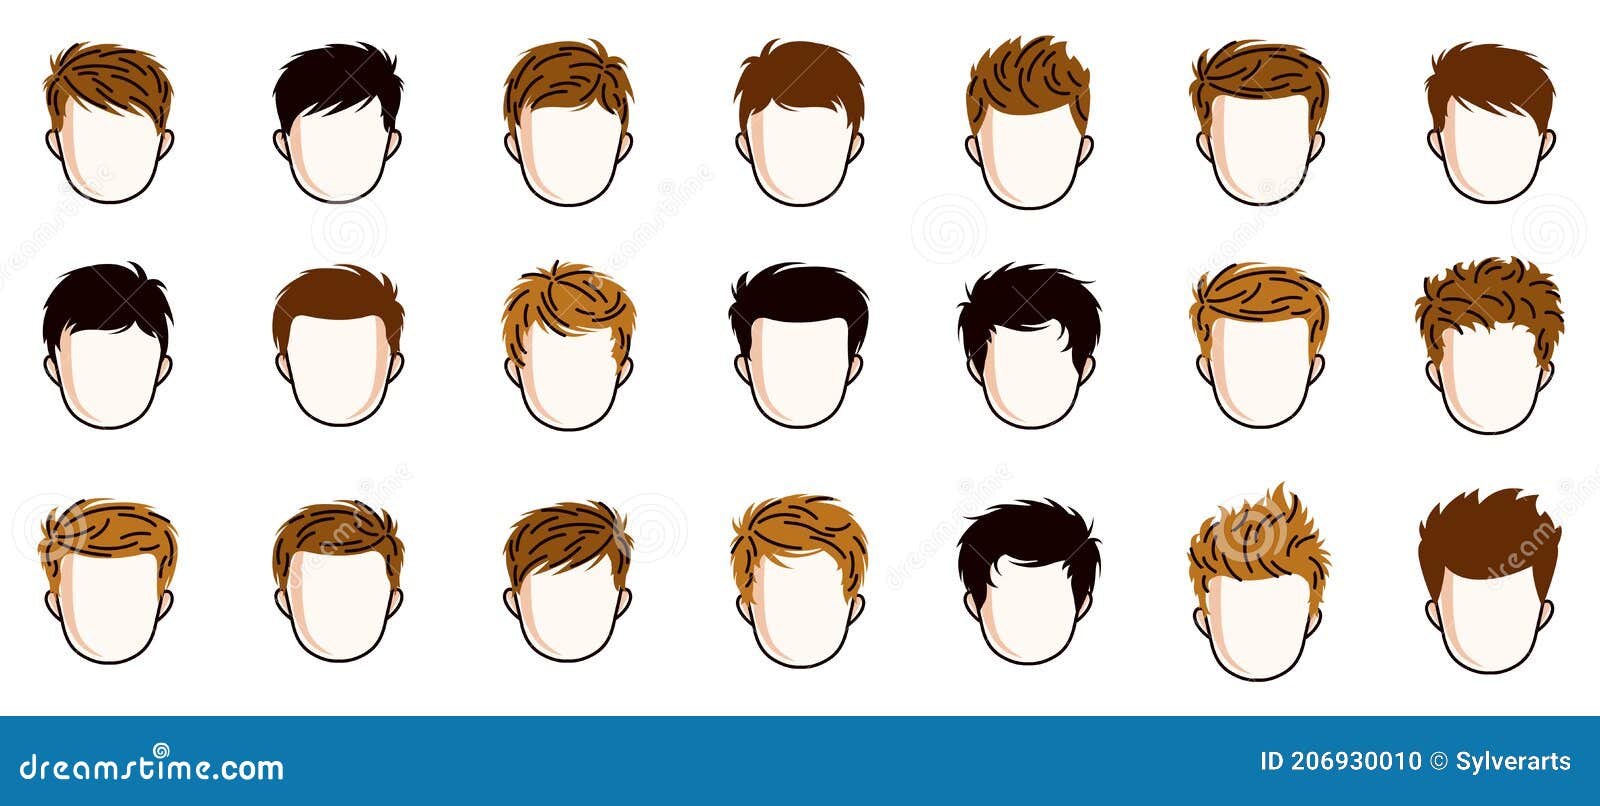 Boy Hairstyles Heads Vector Illustrations Set Isolated on White Background,  Early Teen Kid Boy Attractive Beautiful Haircuts Stock Vector -  Illustration of male, beauty: 206930010